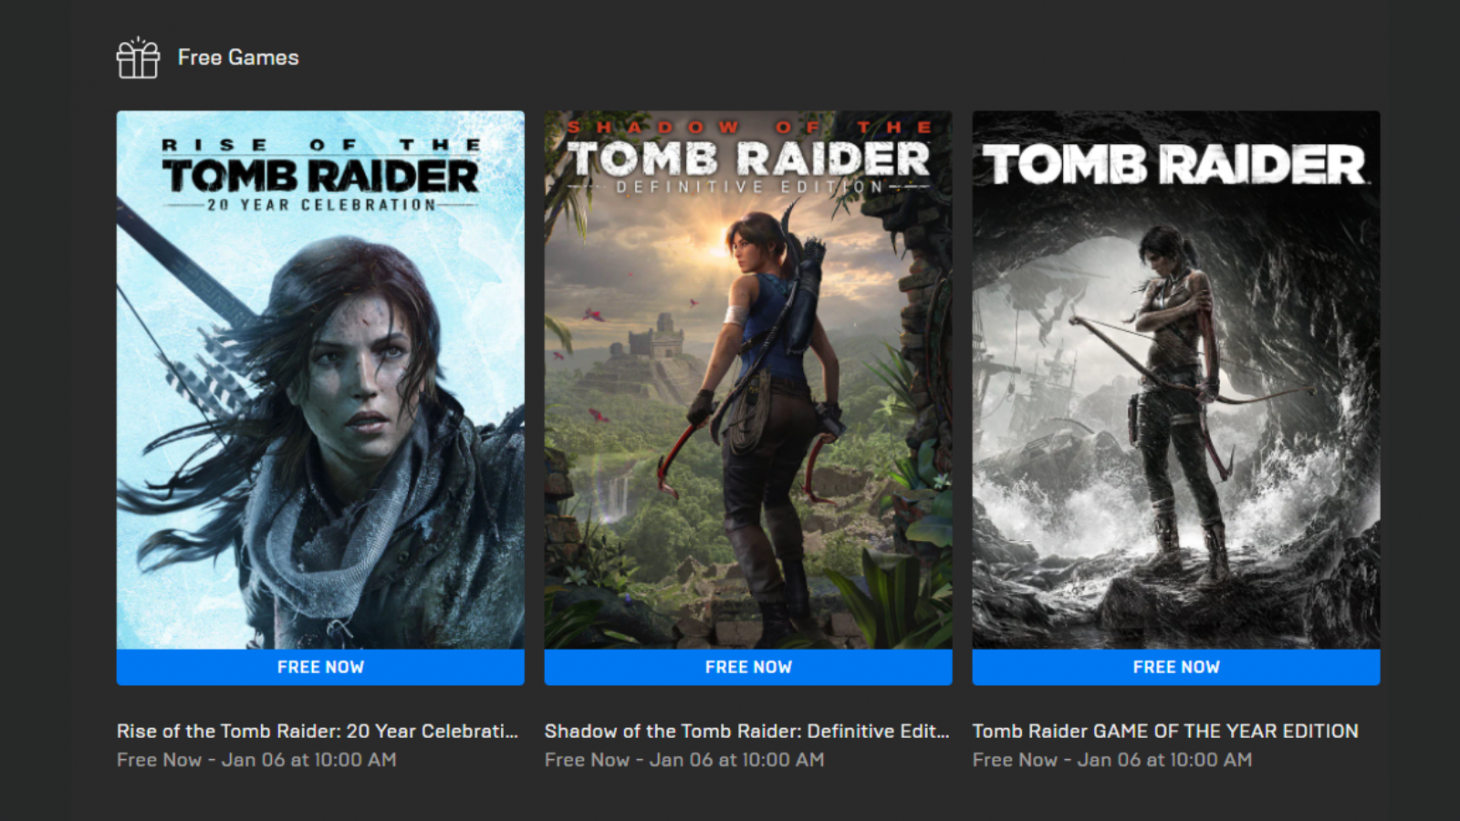 Isoleren Mars sensor The Tomb Raider Trilogy Is Free On The Epic Games Store - Game Informer